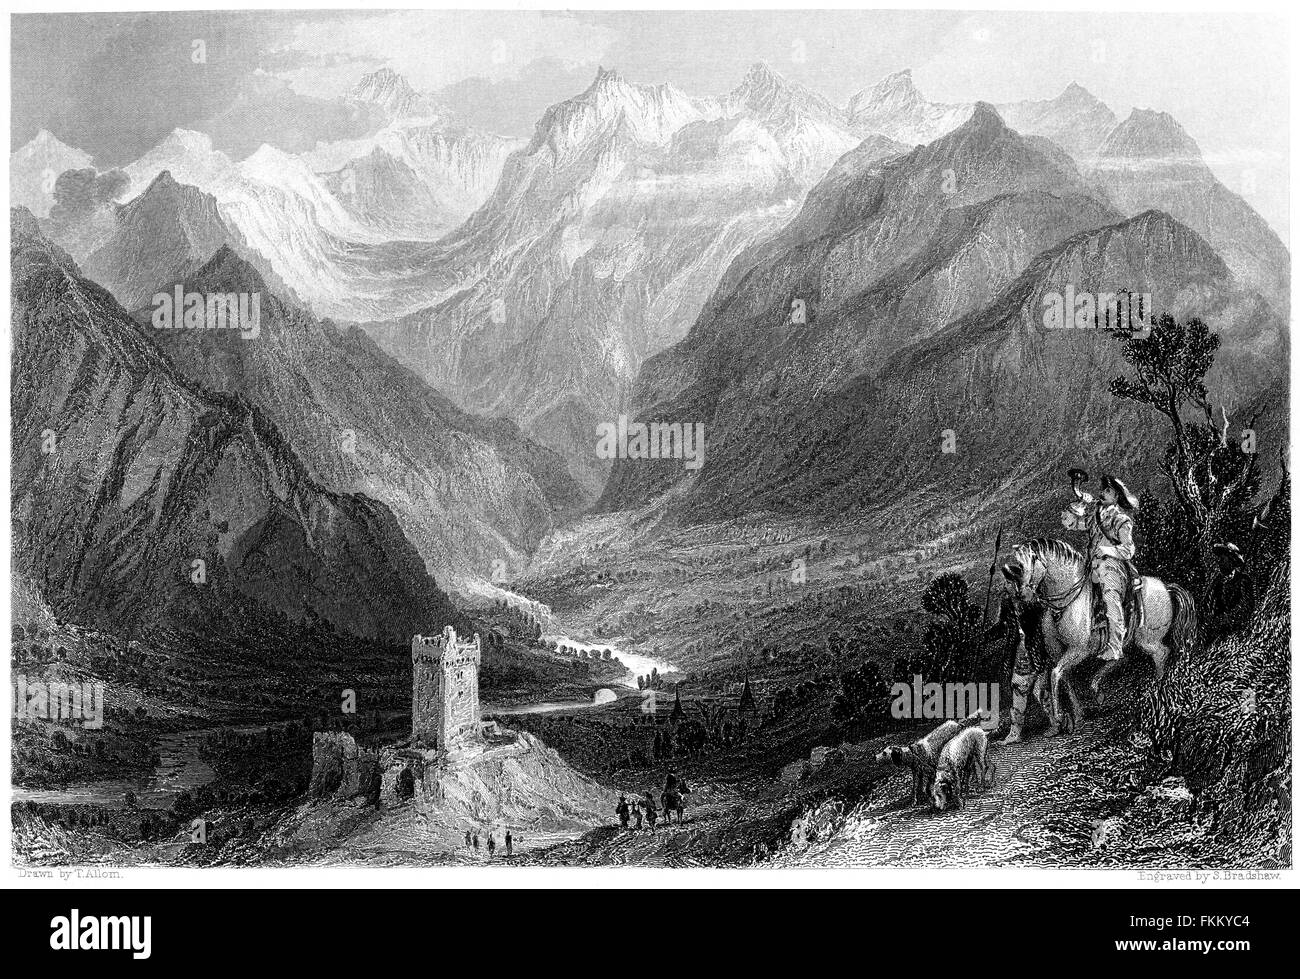 Engraving of the Castle and Valley d'Oo, Pyrenees canned at high resolution from a book printed in 1876. Believed copyright free Stock Photo